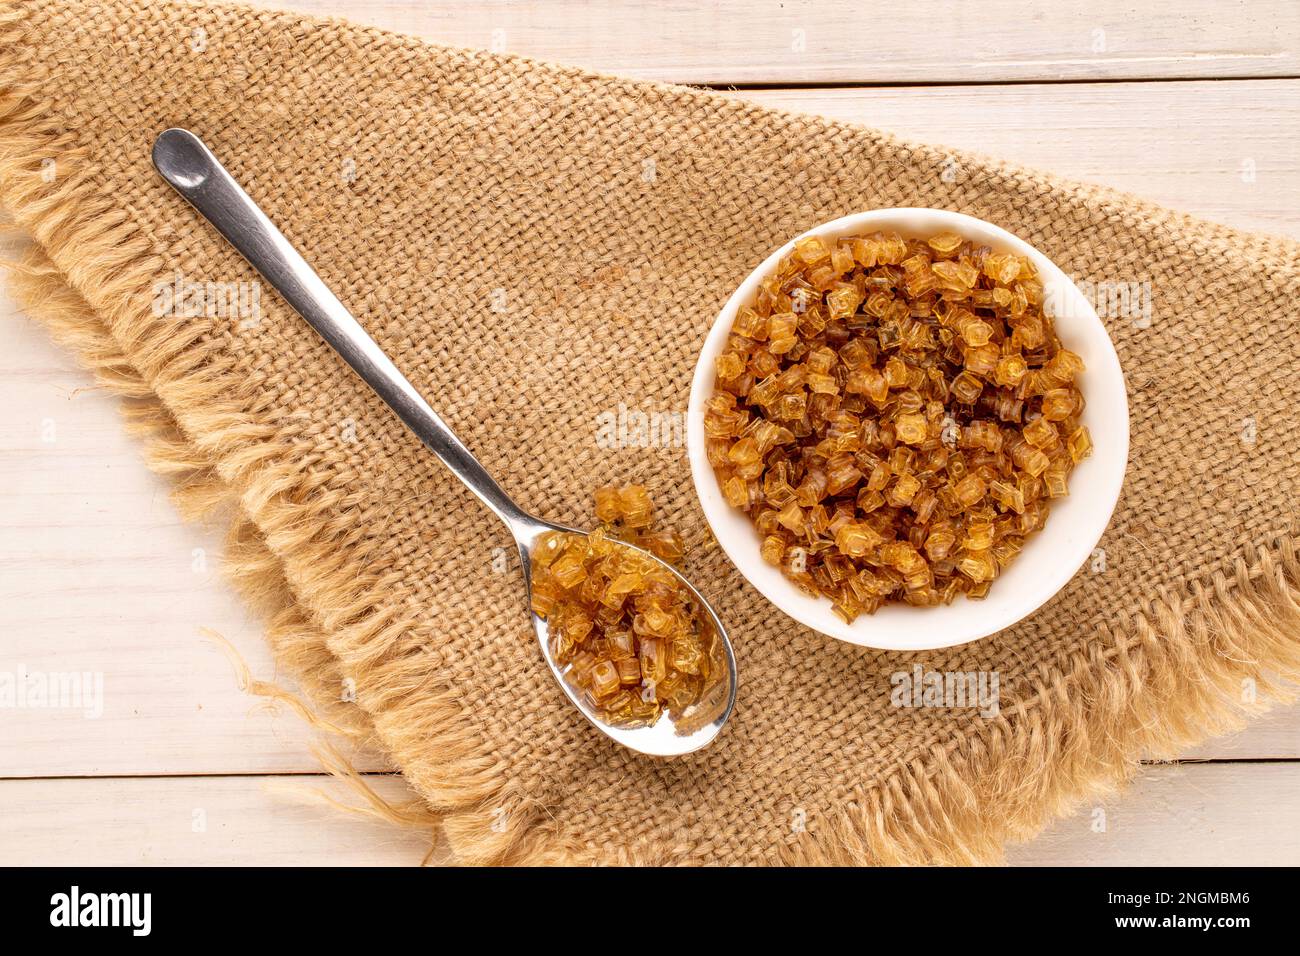 Yellow gelatin granules in white plate with metal spoon and jute napkin on wooden table, macro, top view. Stock Photo